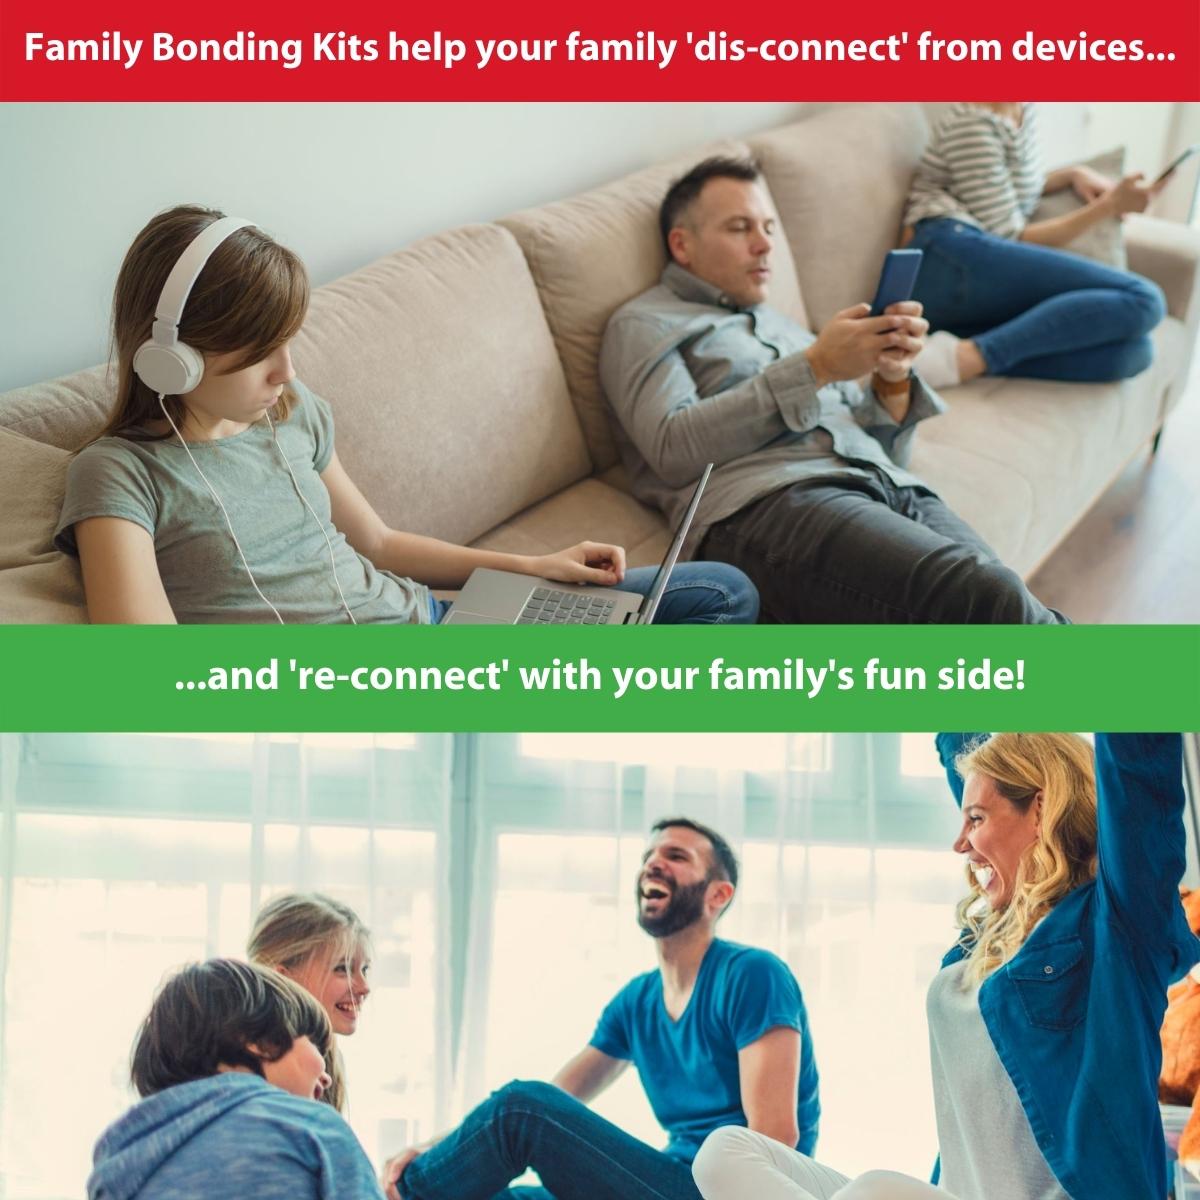 Get Your Family off Devices